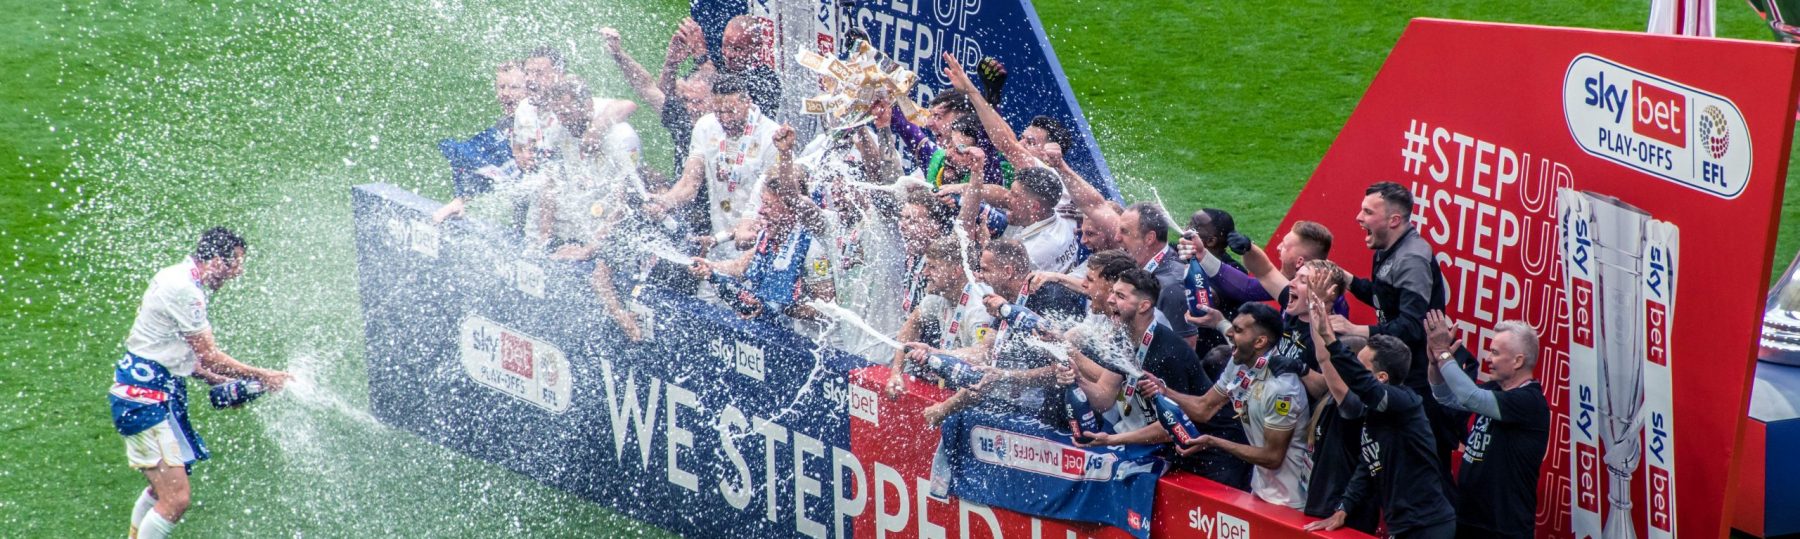 Port Vale 3-0 Mansfield Town, League Two play-off final